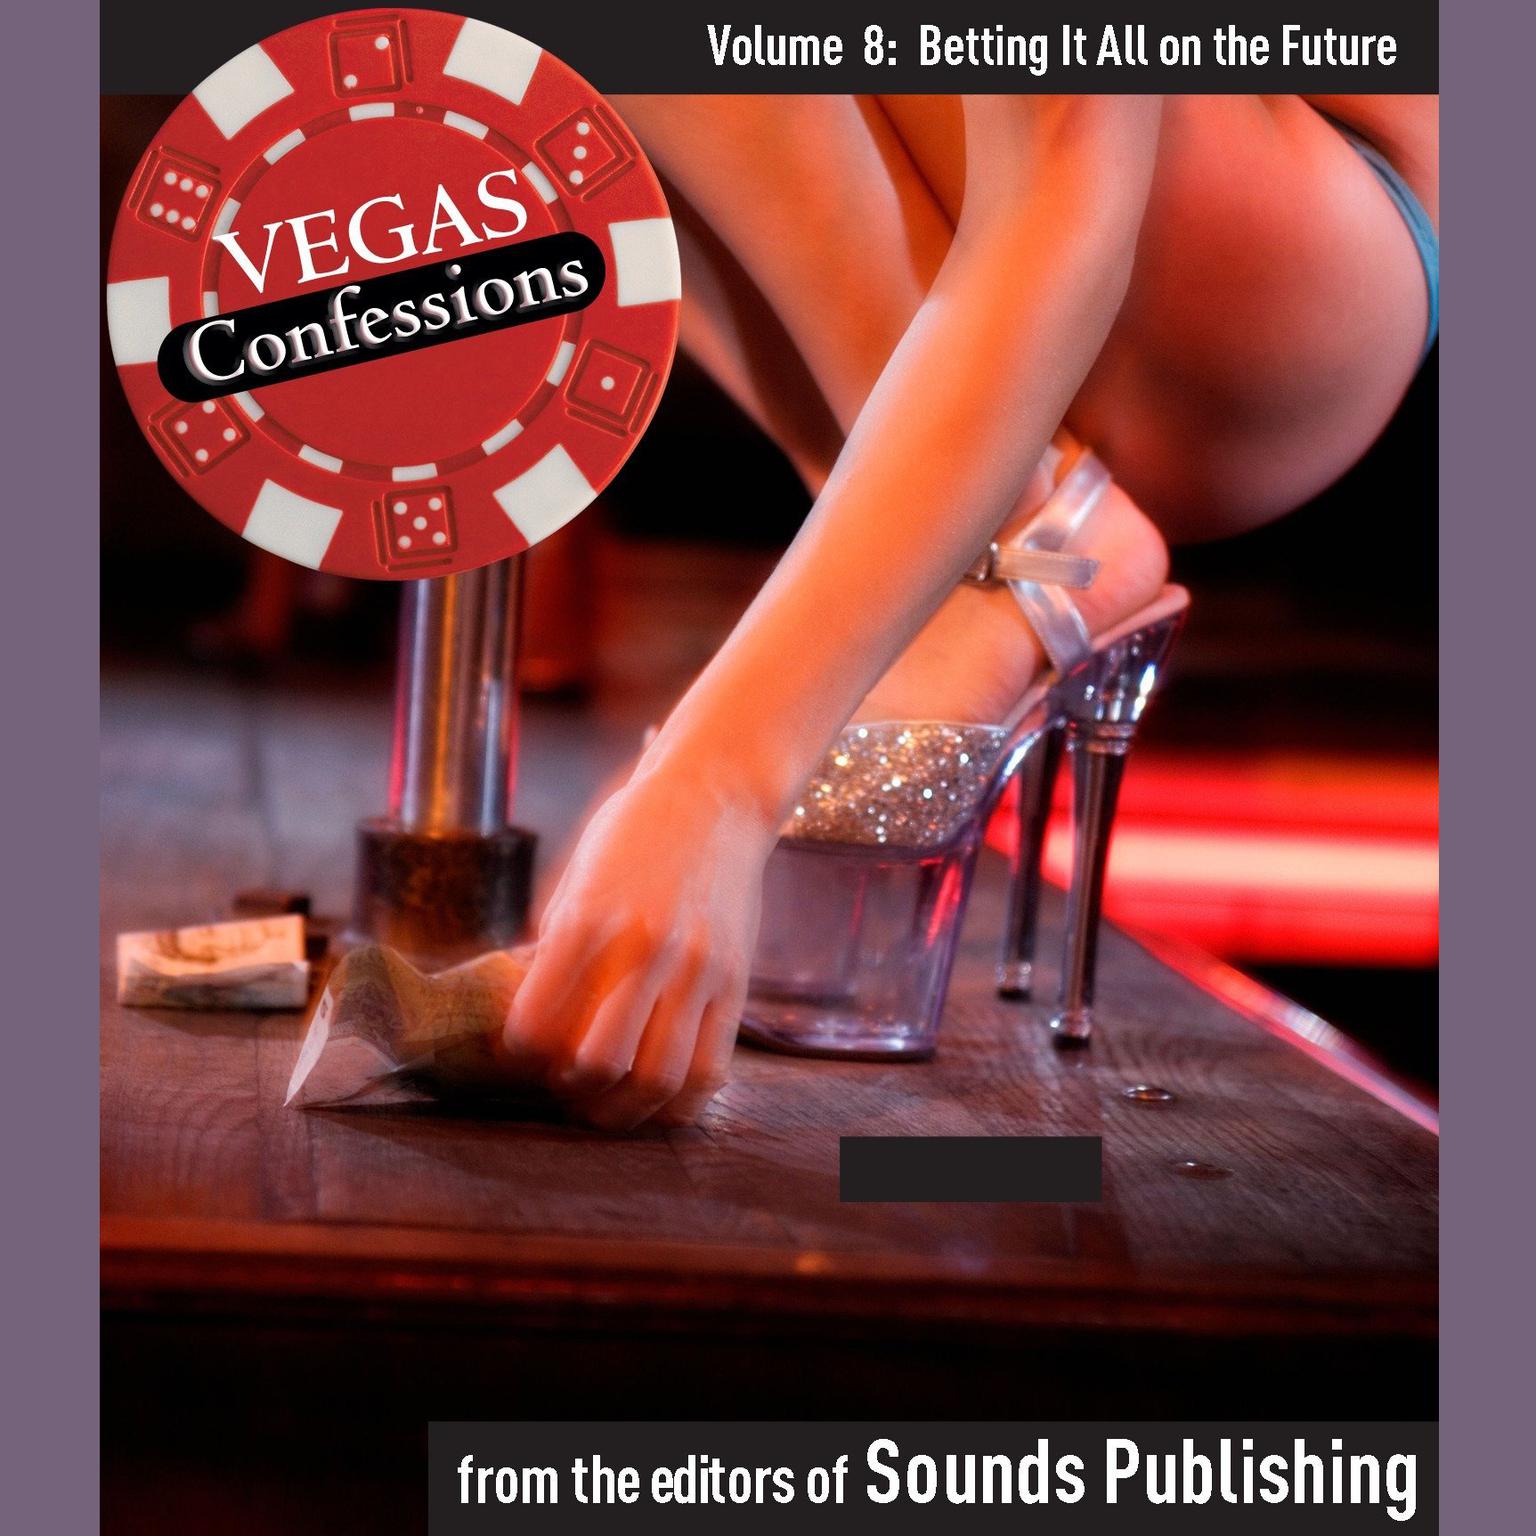 Vegas Confessions 8: Betting It All on the Future Audiobook, by The Editors of Sounds Publishing